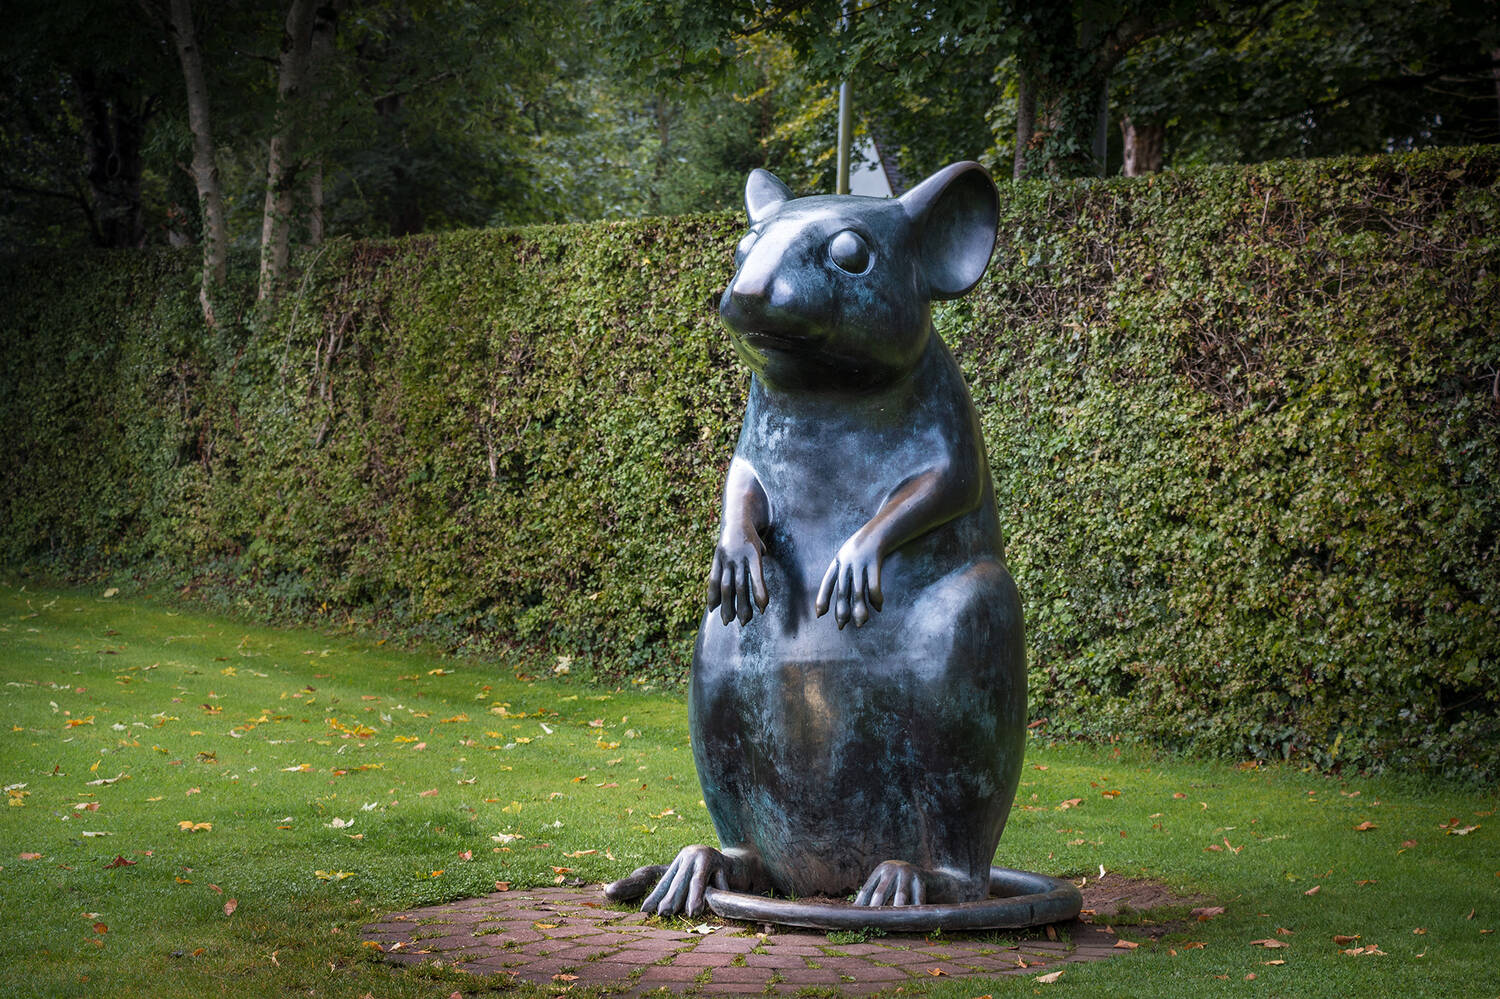 A large statue of a mouse sitting up on its hind legs with its tail wrapped around the base.